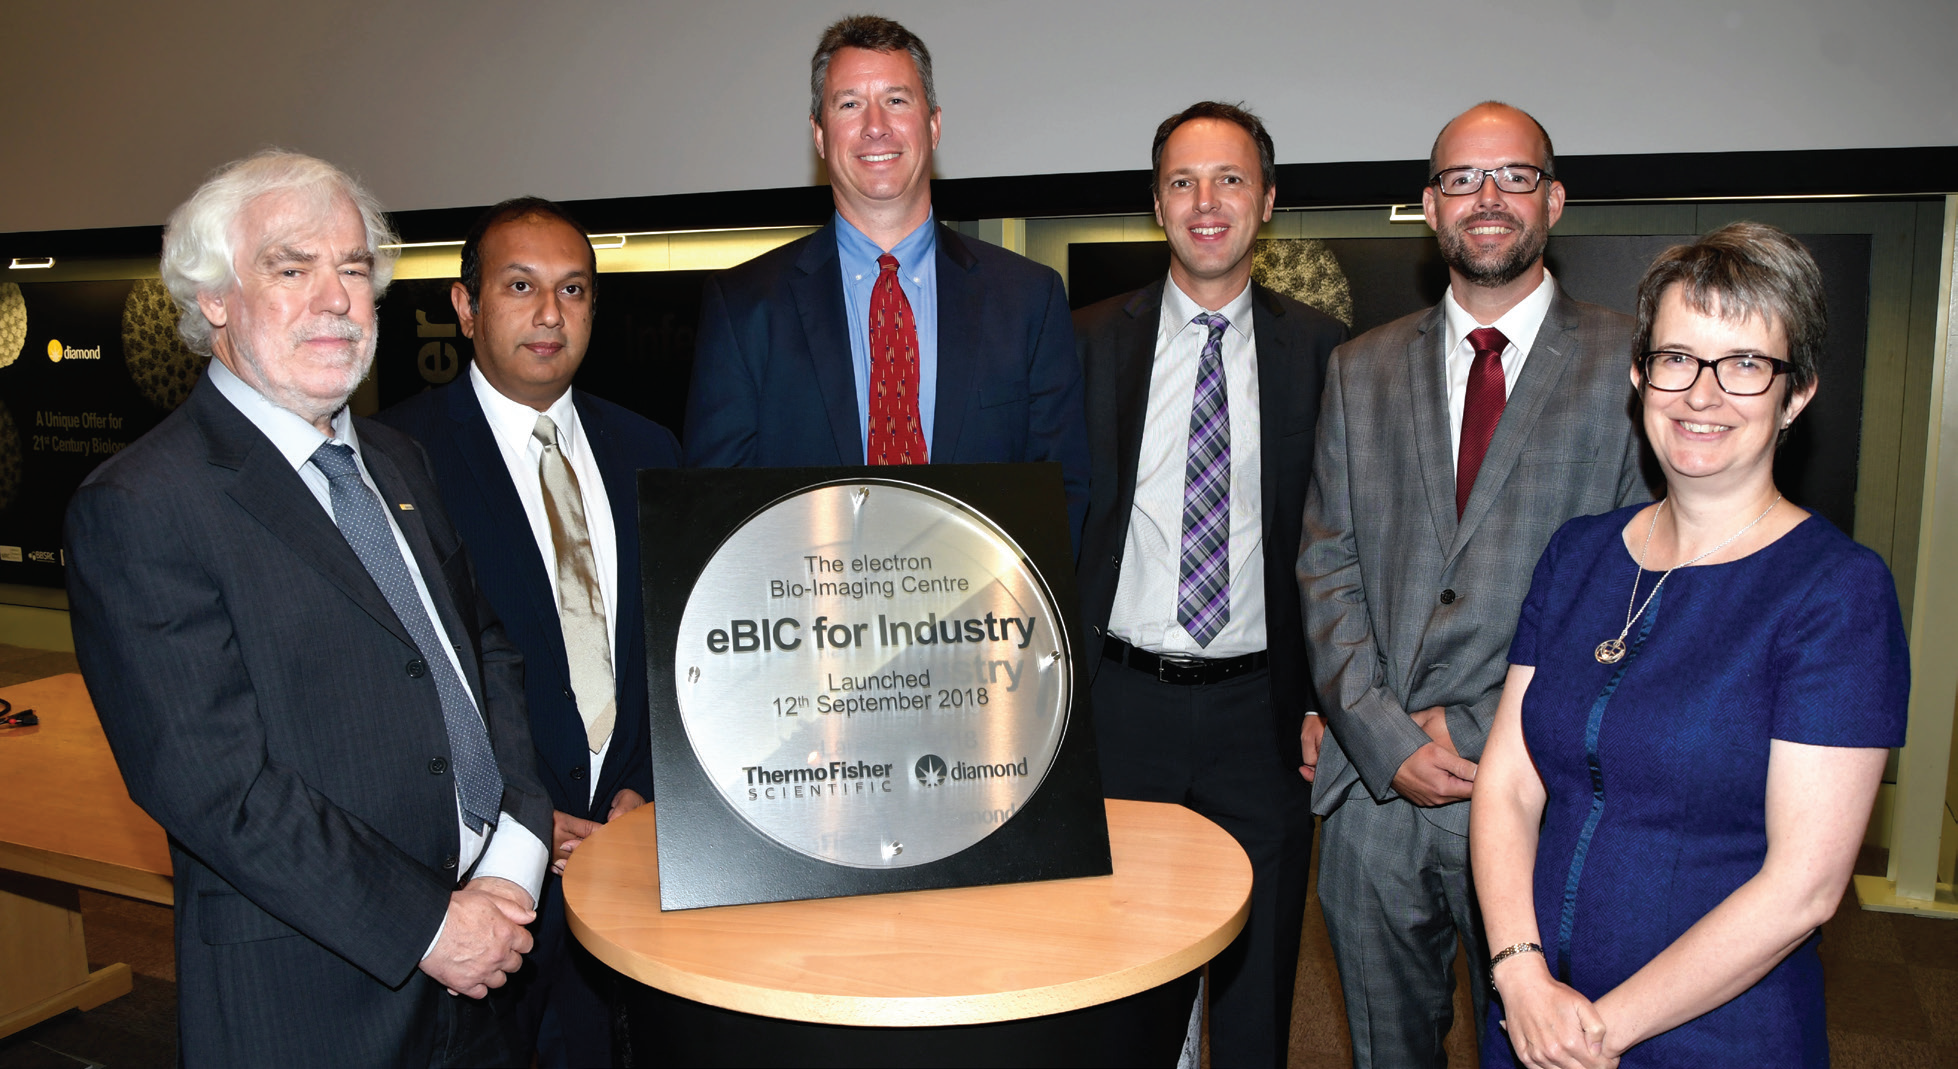 Celebrating the Thermo Fisher Scientific agreement during the official launch of eBIC. Left to right: Dave Stuart, Diamond Light Source, Rishi Matadeen, Dan Shine and Raymond Schrijver, Thermo
<br/>Fisher Scientific, Jason van Rooyen and Elizabeth Shotton, Diamond Light Source.